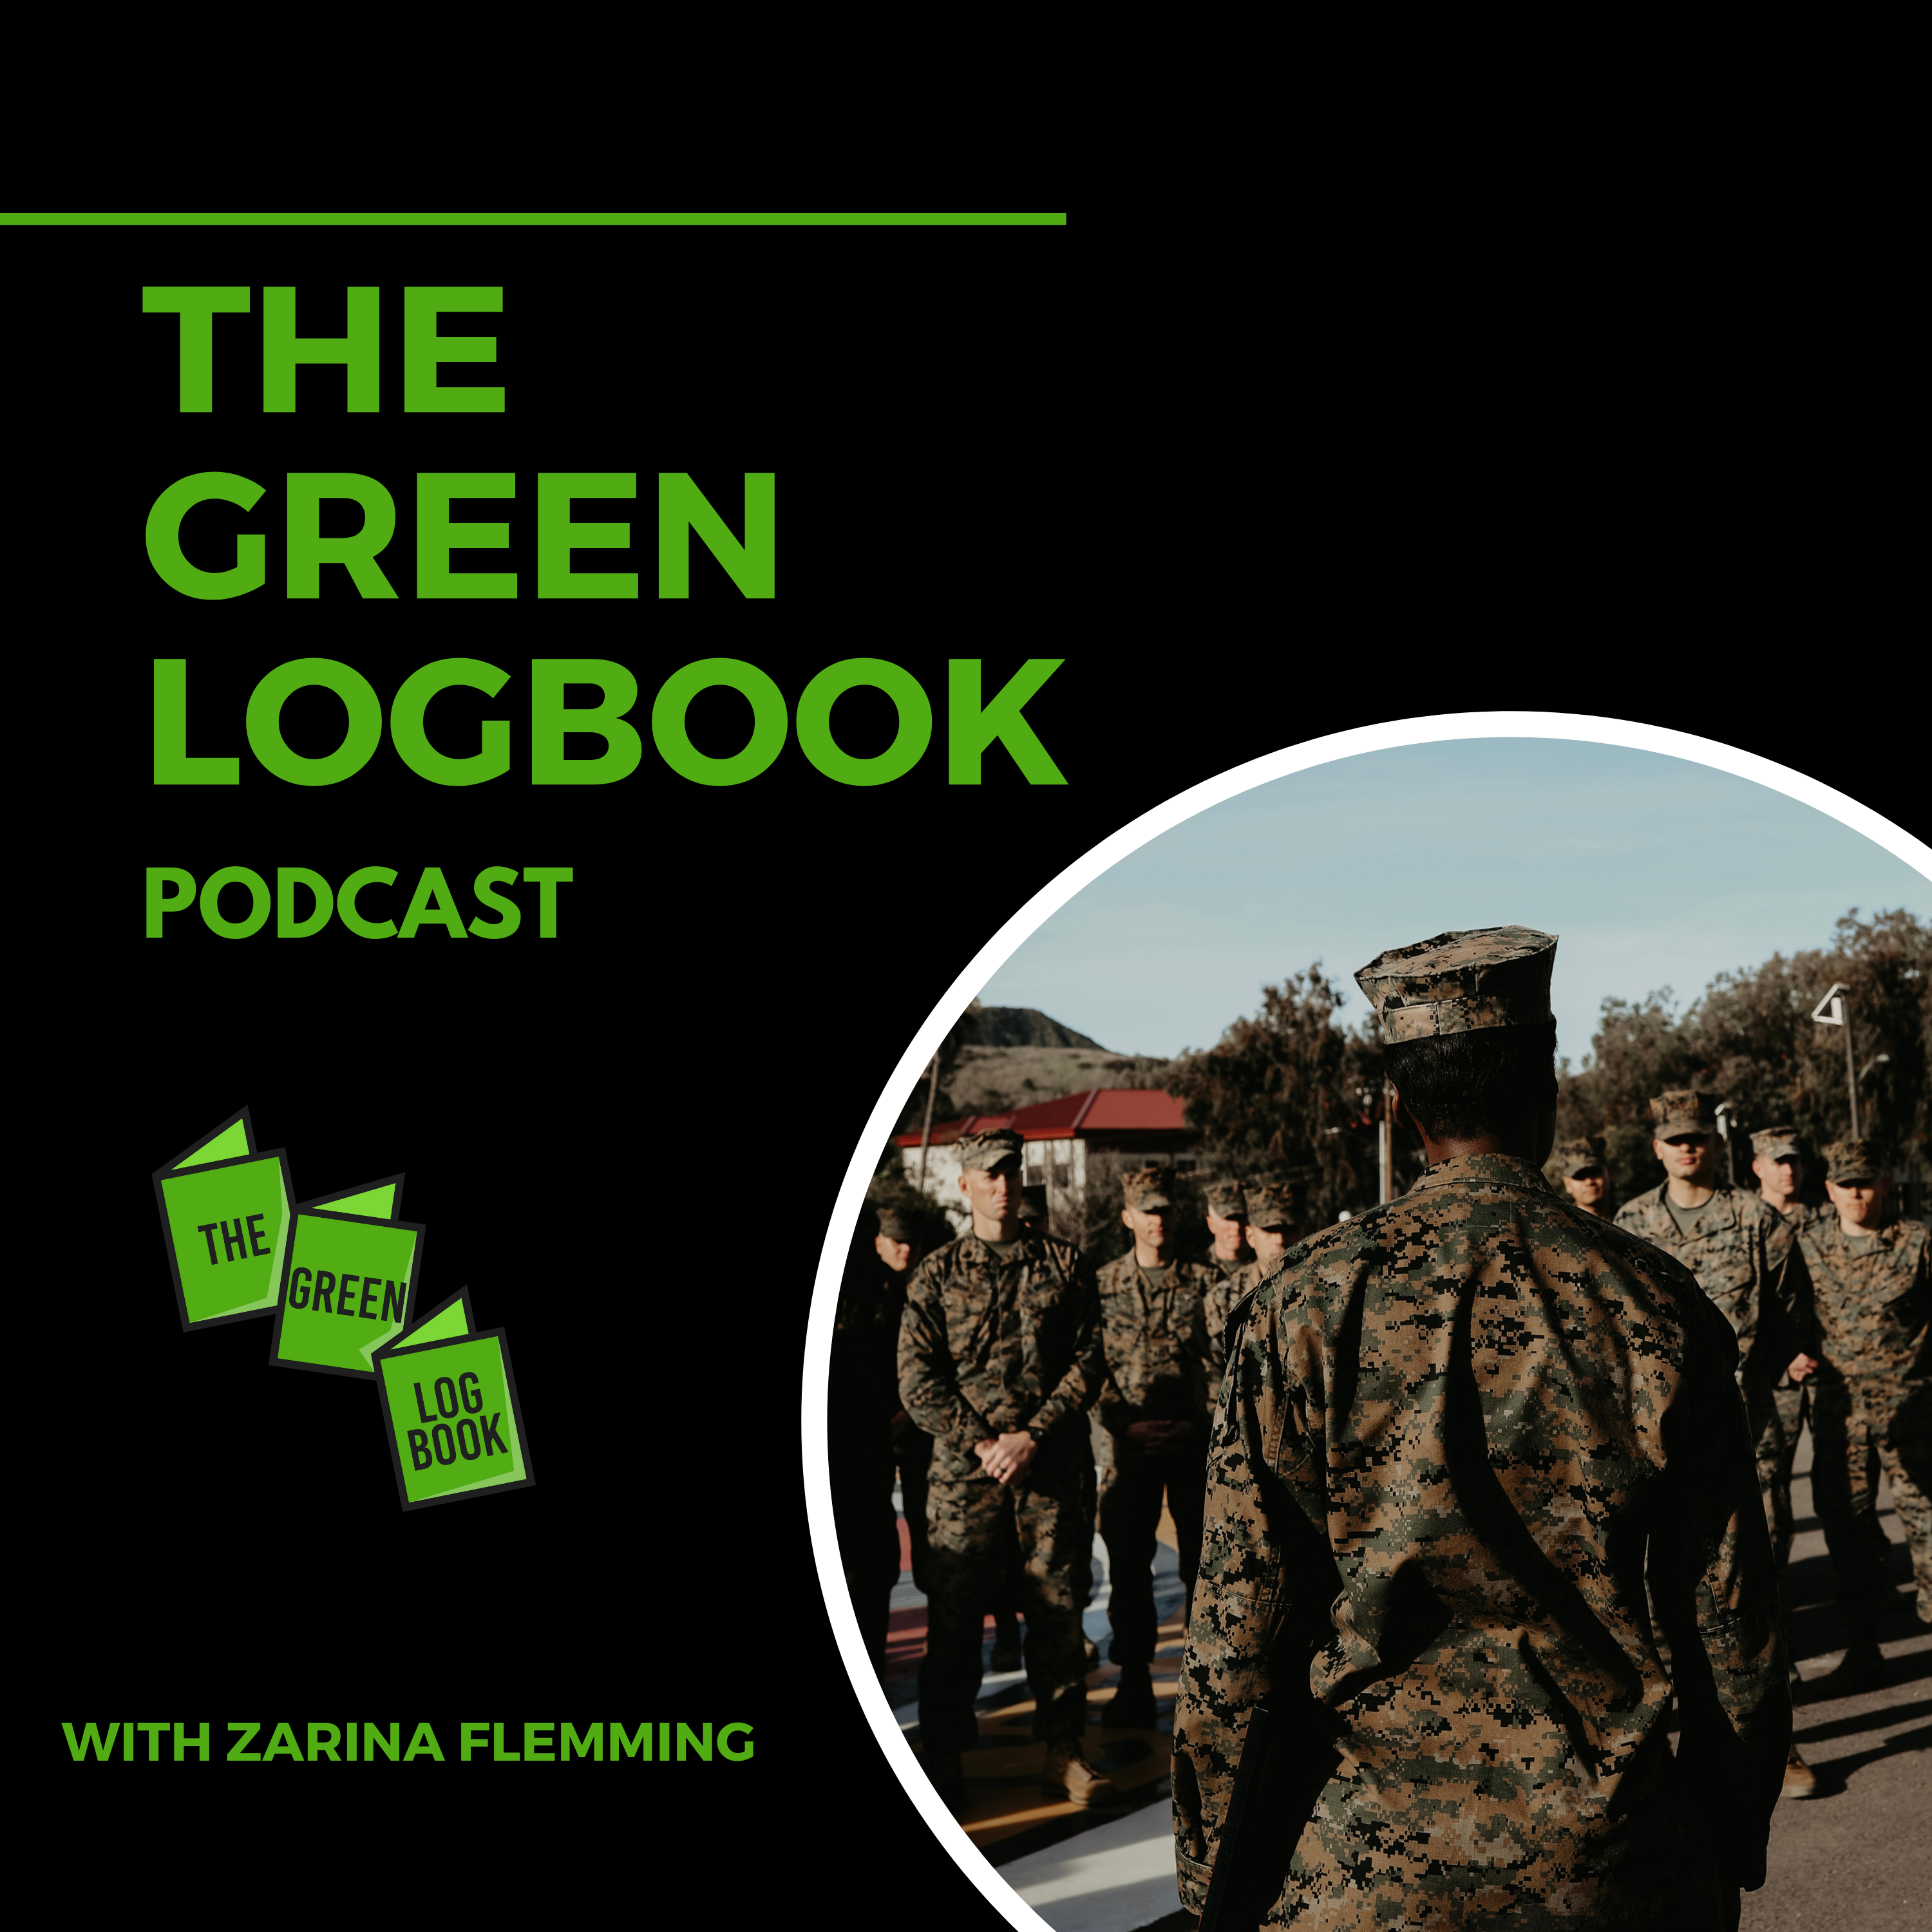 The Green Logbook Podcast